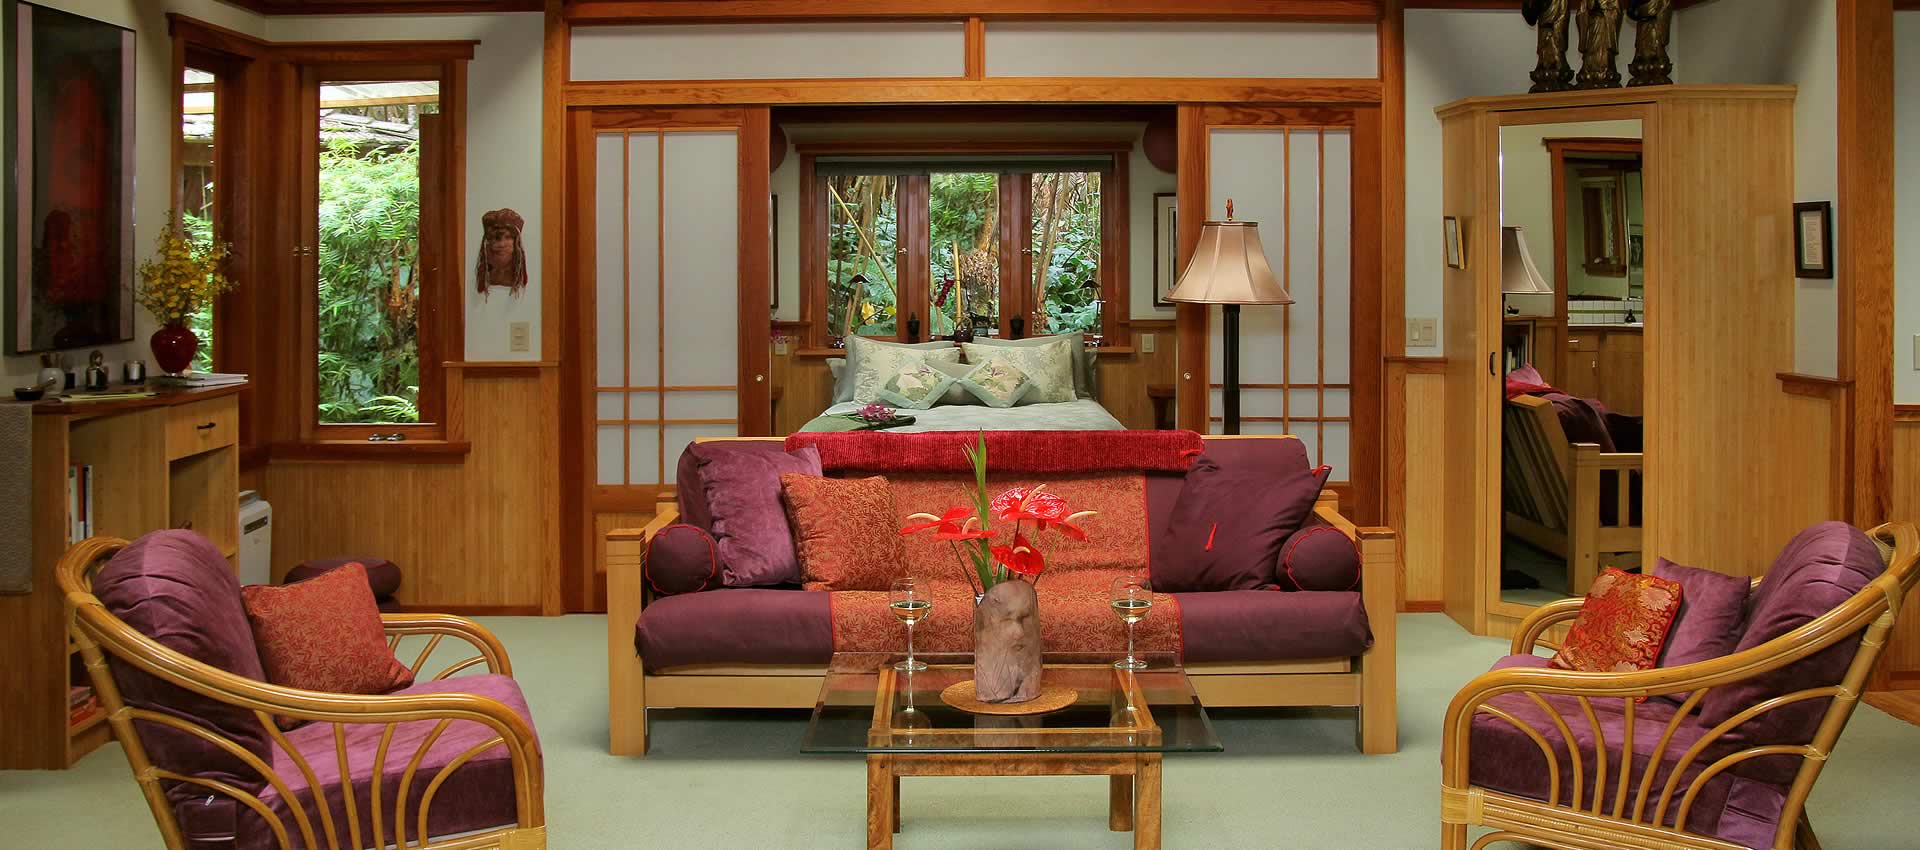 Bamboo Guest House living room sitting area